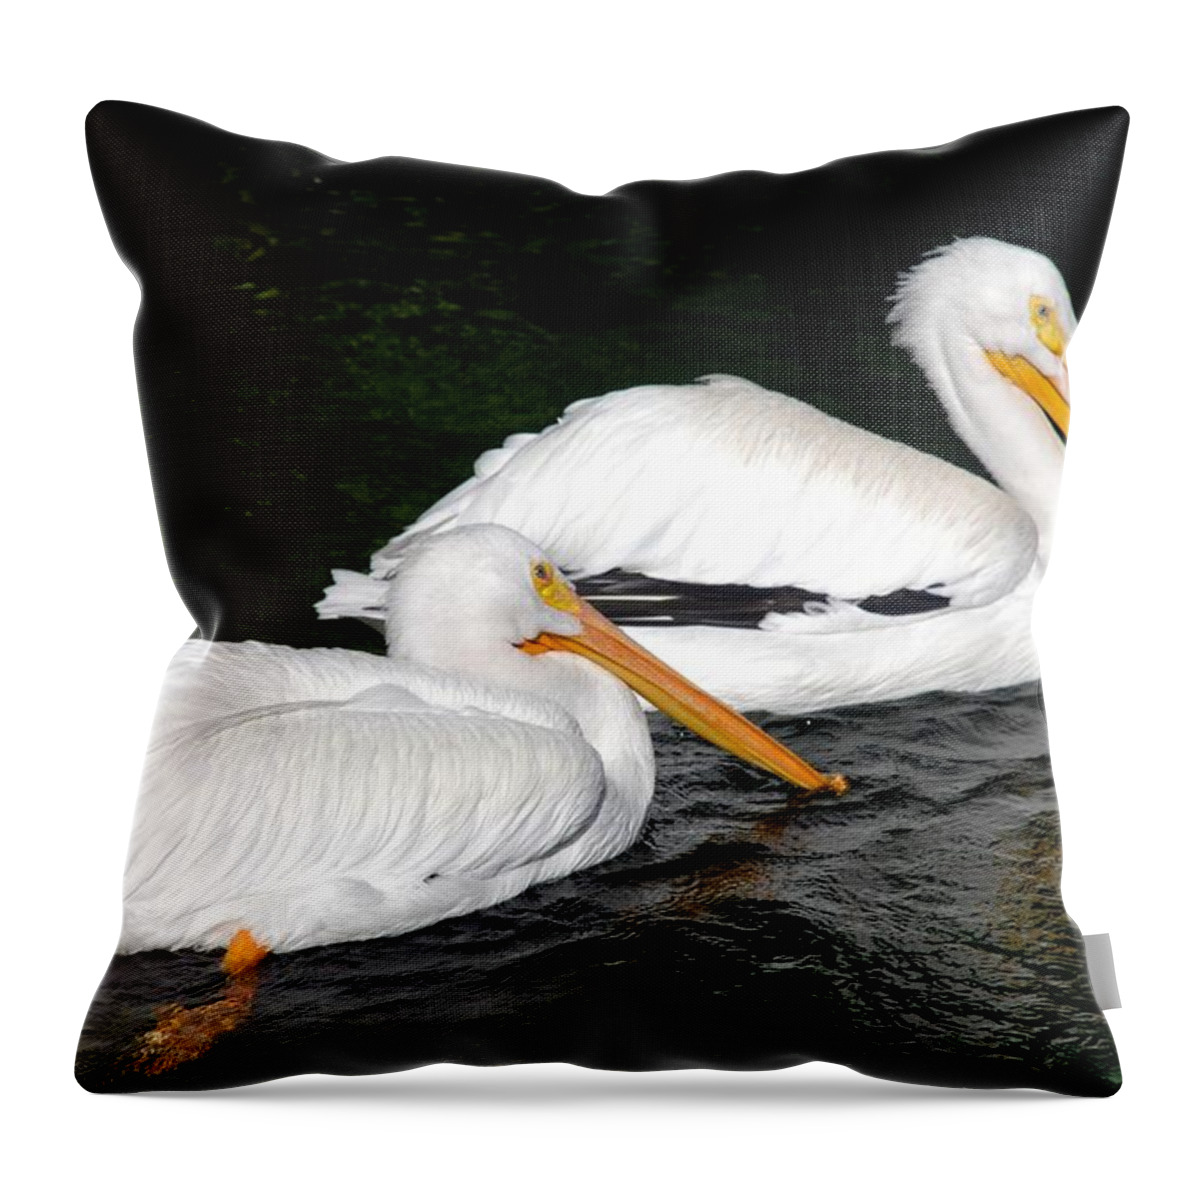 Ft. Worth Throw Pillow featuring the photograph Pelican Swim by Kenny Glover